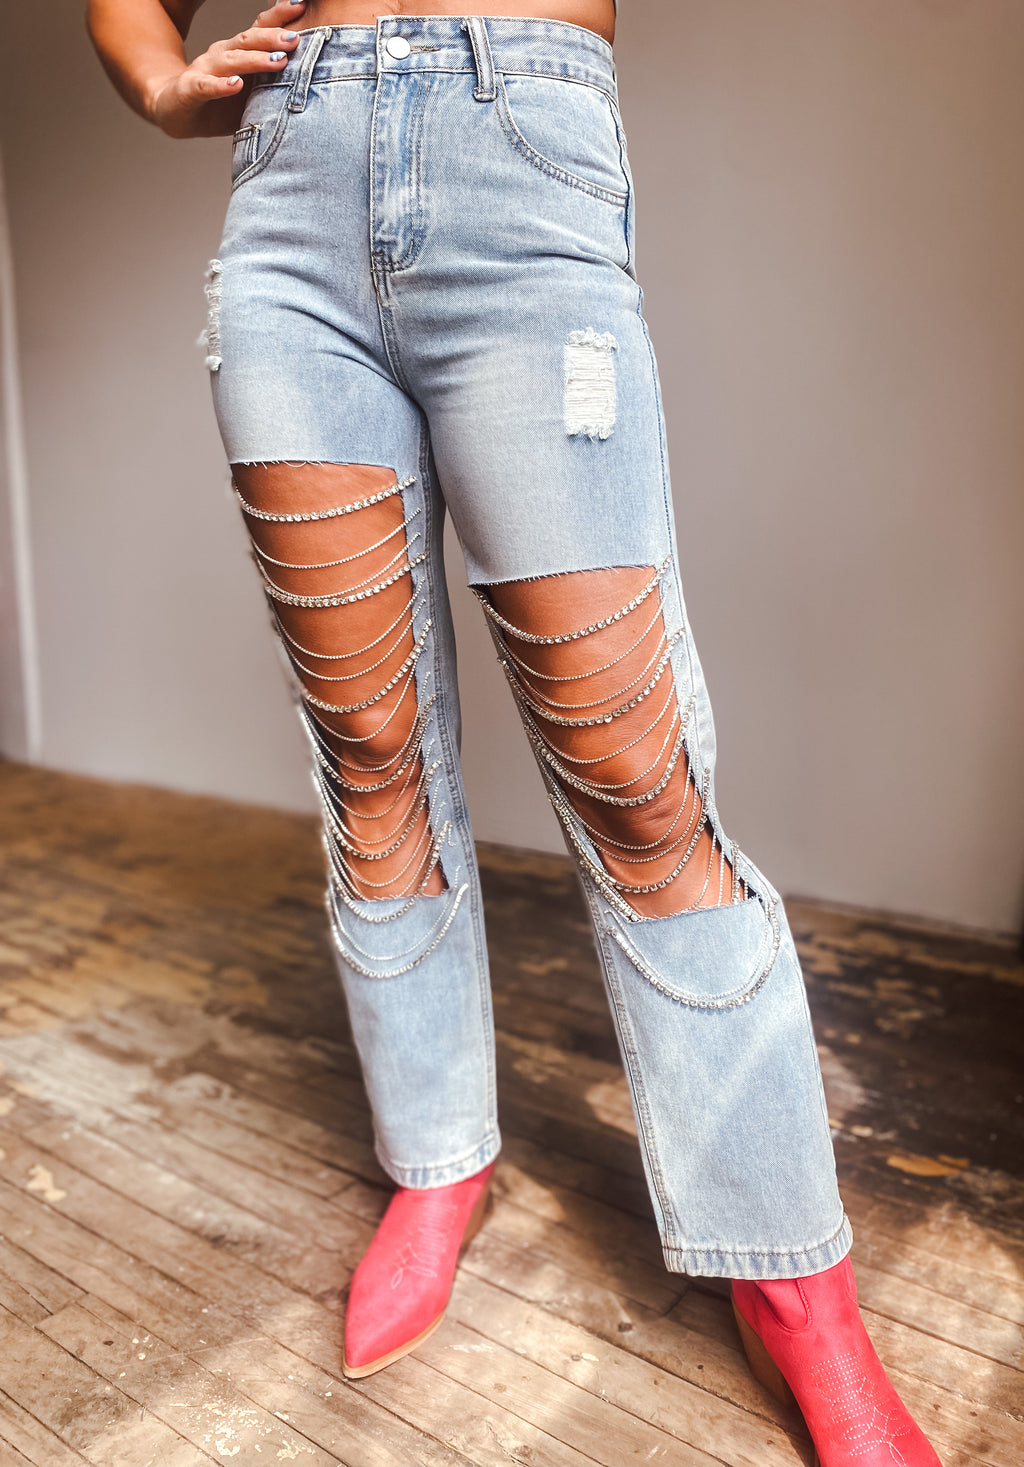 Giving these rhinestone jeans their moment✨🤩 #rodeo #rodeocollection